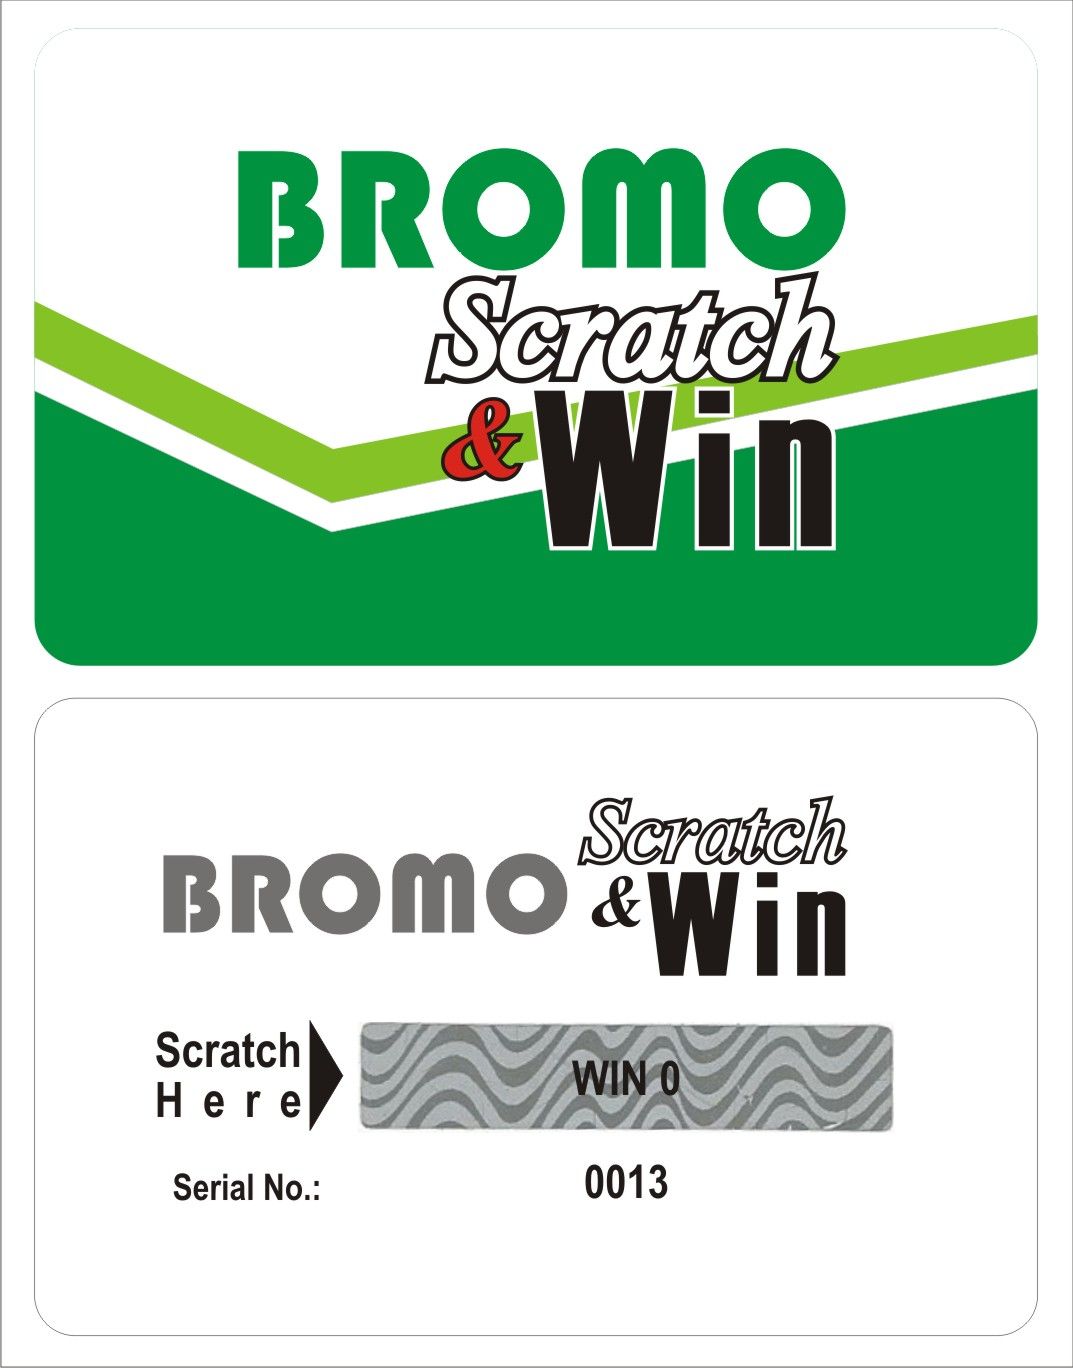 CALL EMMANUEL ON 08176499649 TO PRINT SCRATCH AND WIN PROMO CARDS IN LAGOS NIGERIA